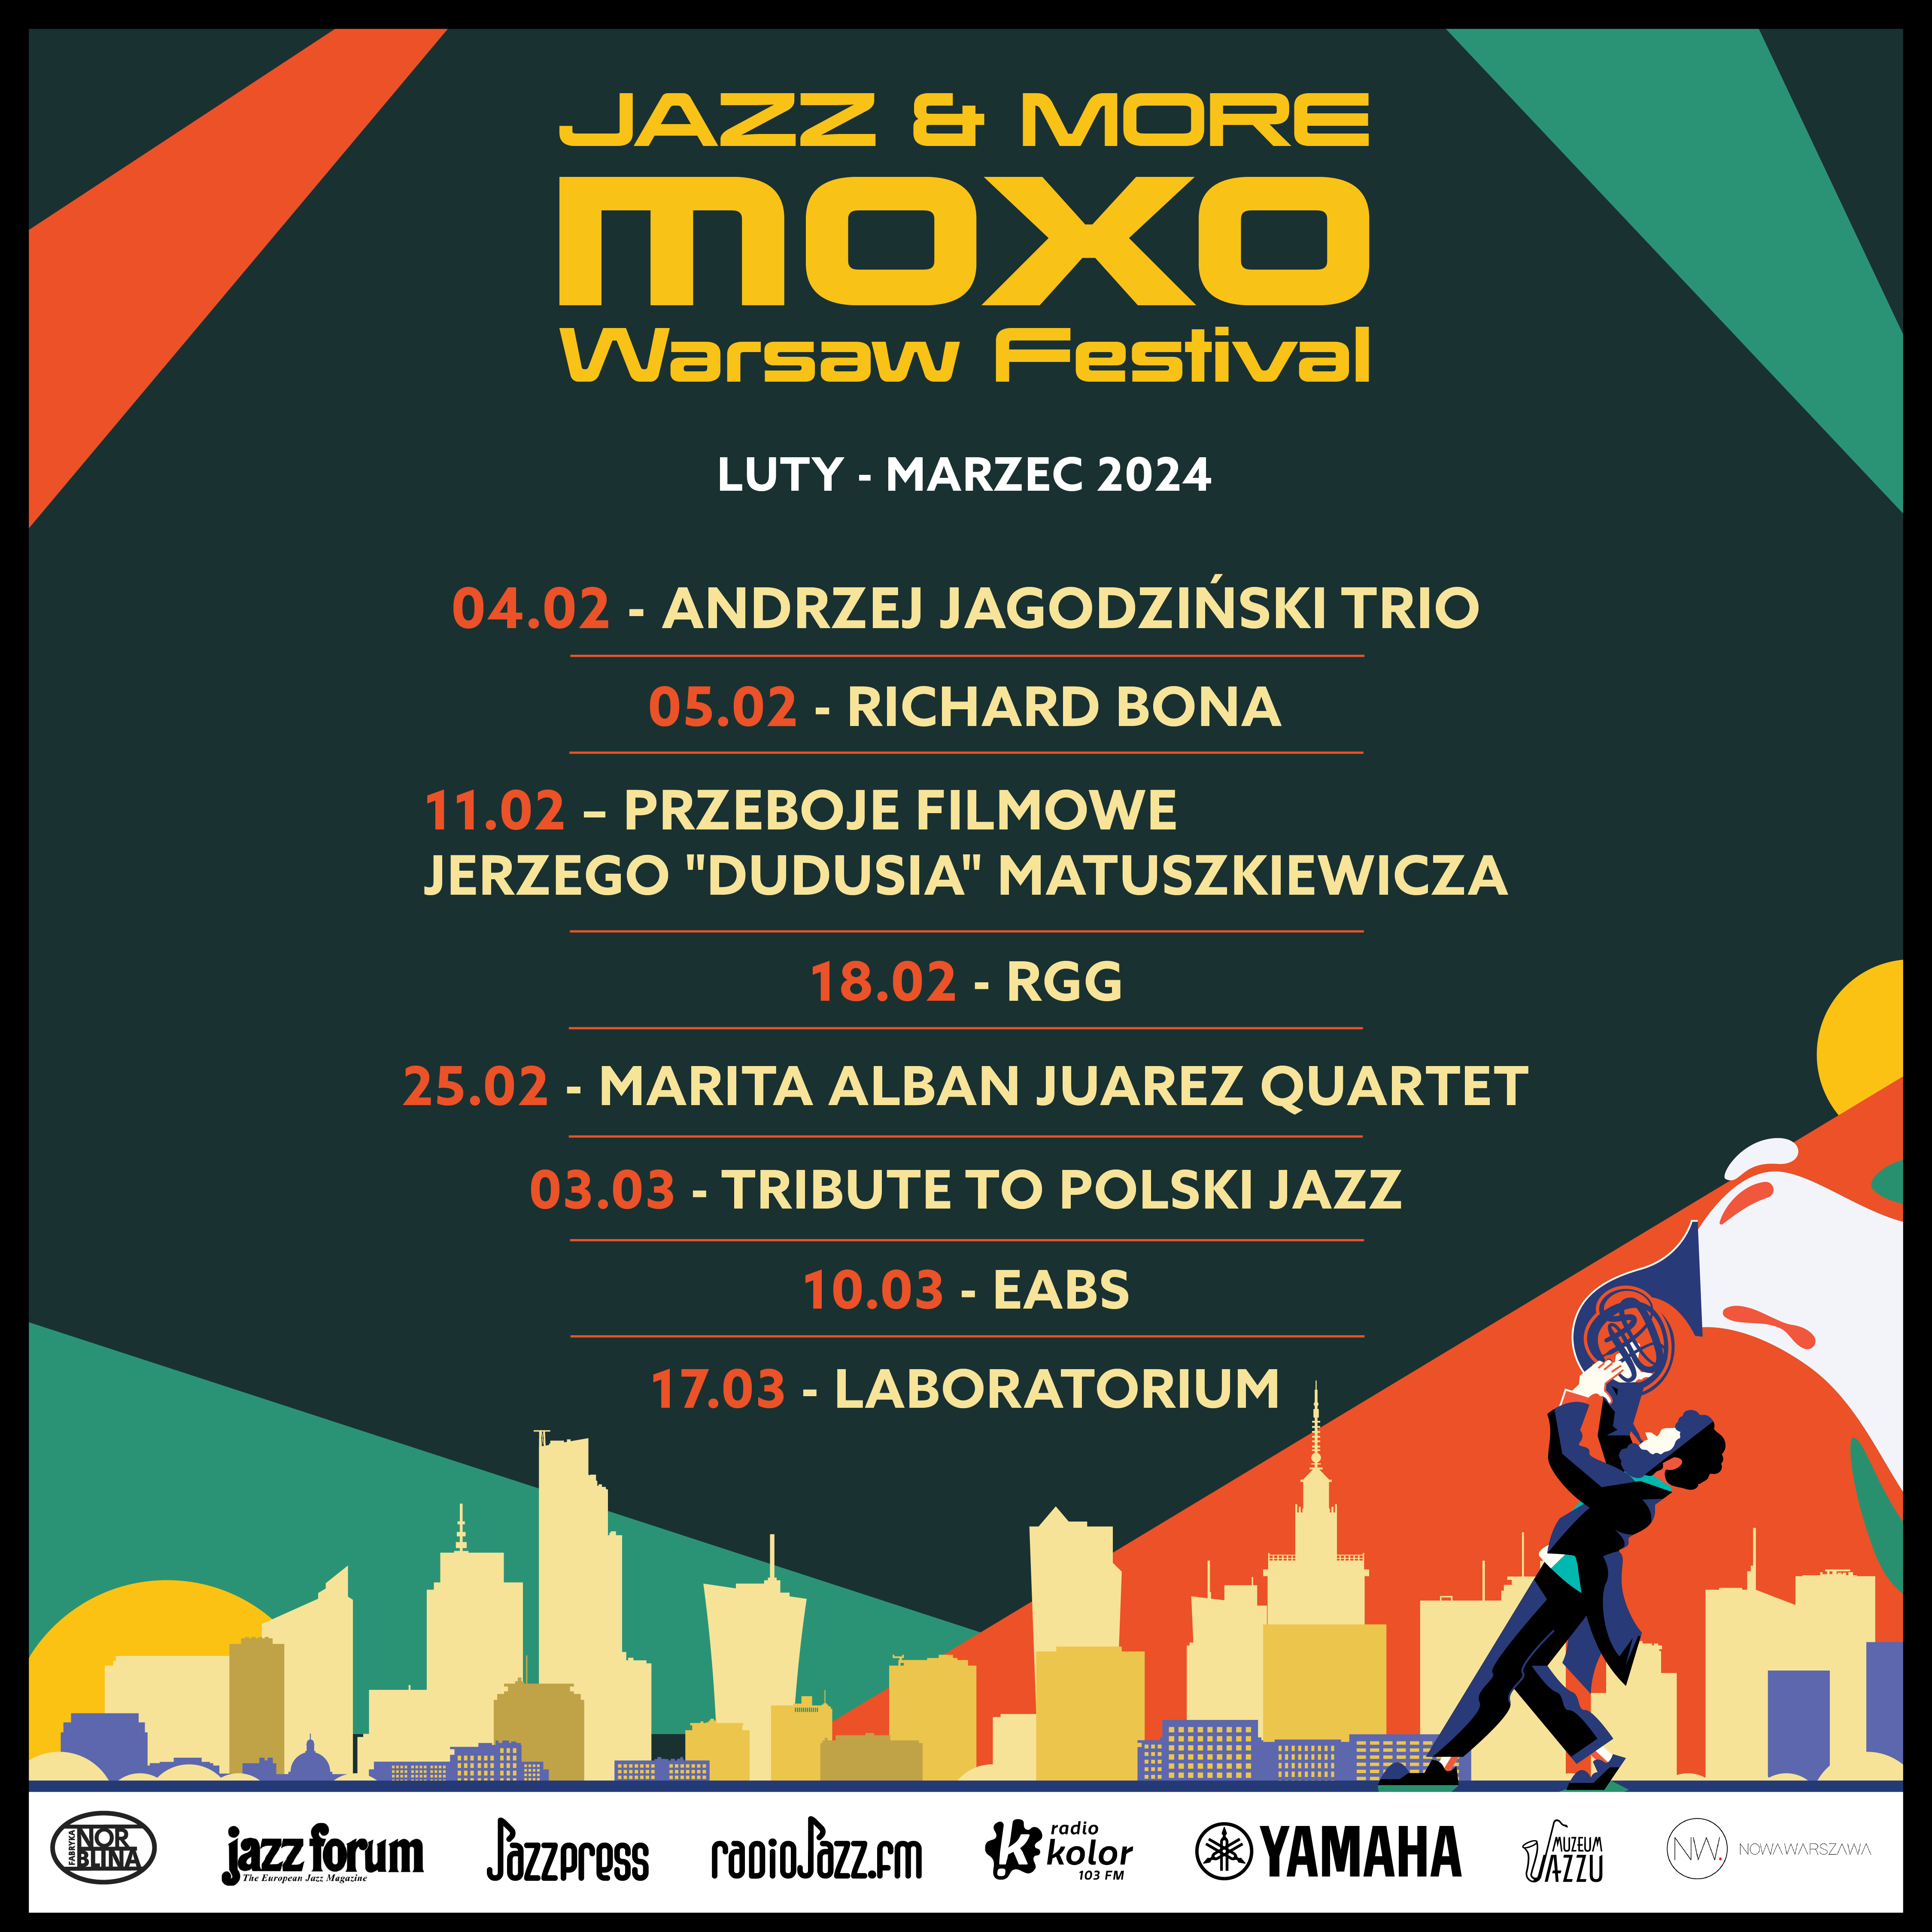 Jazz & More MOXO Warsaw Festival – The second edition of the festival kicks off